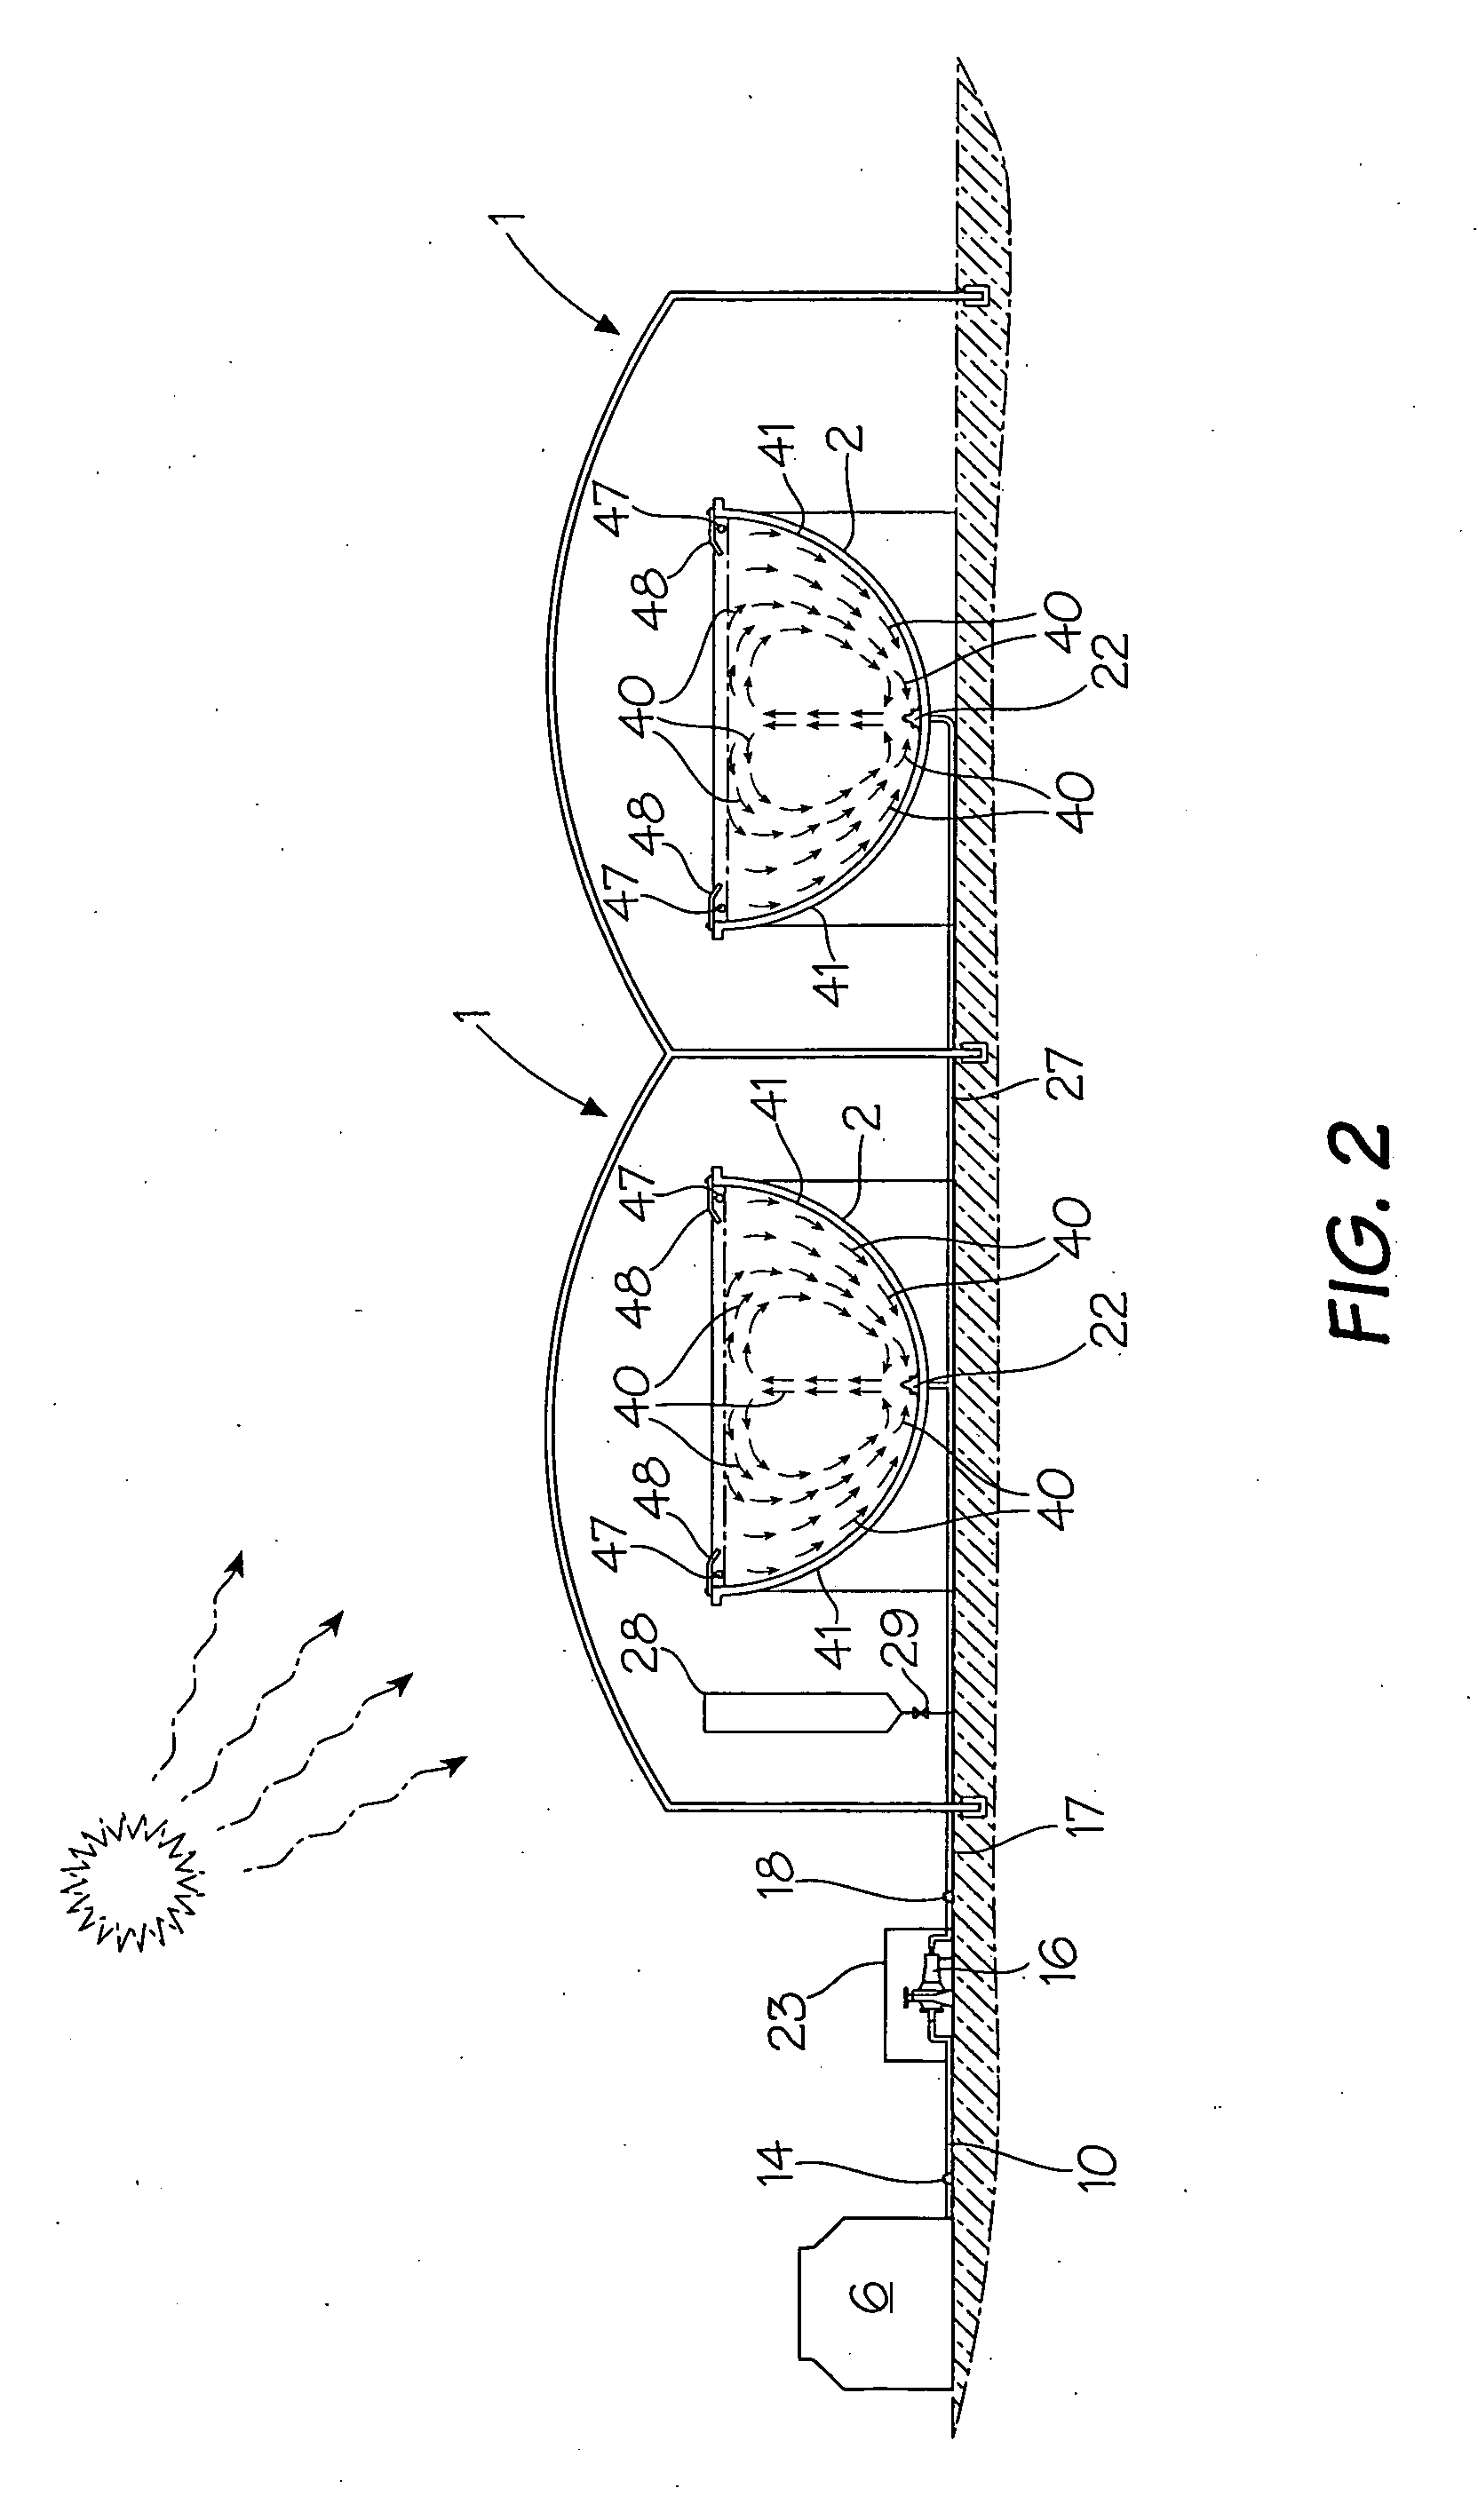 Method and apparatus for cultivating organisms